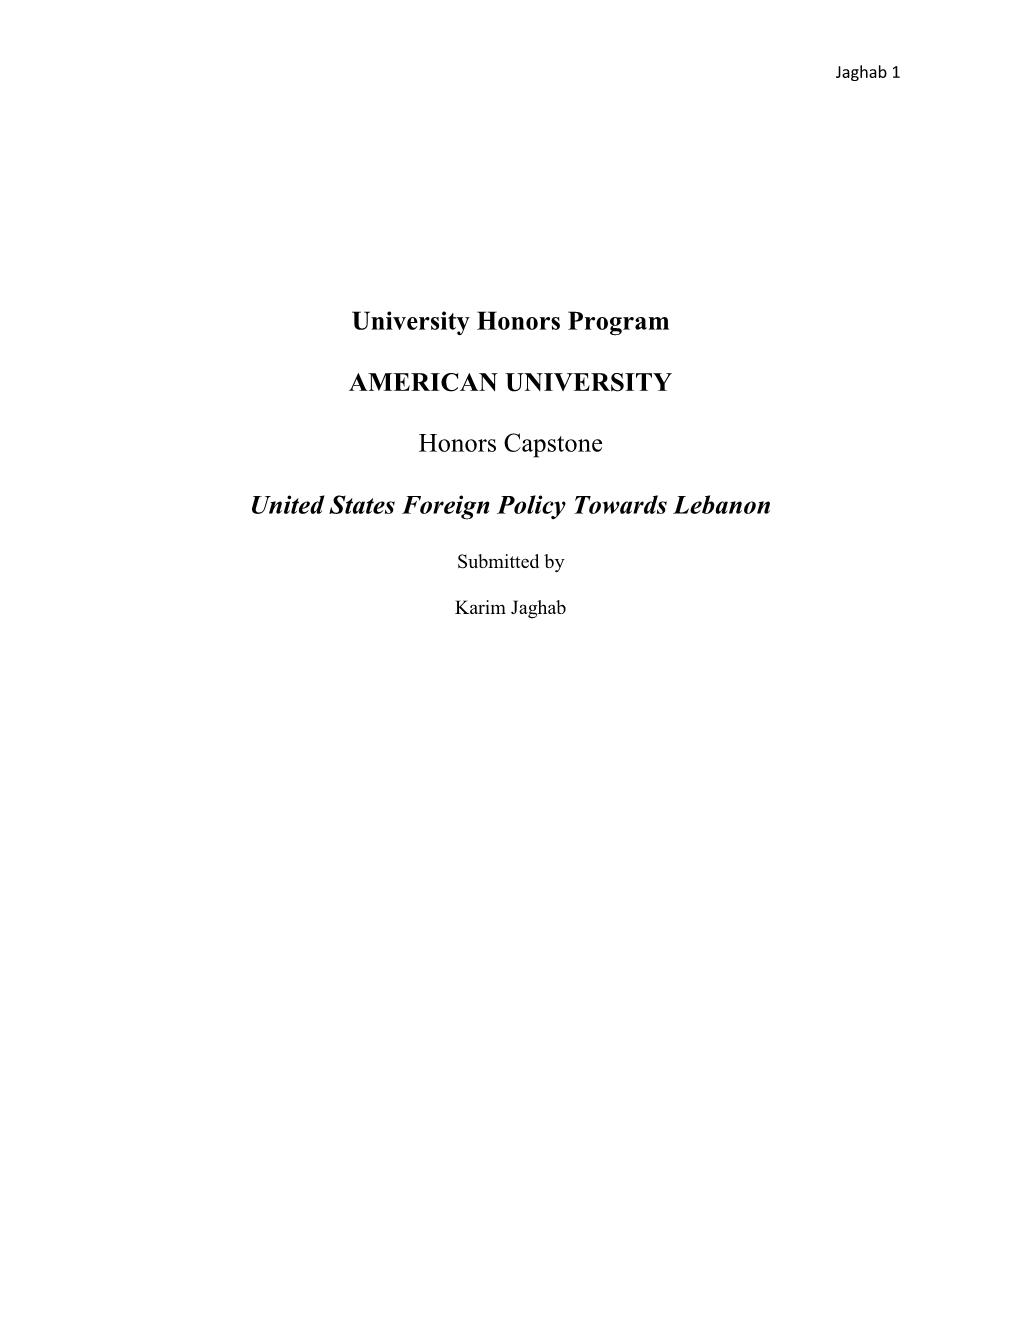 United States Foreign Policy Towards Lebanon